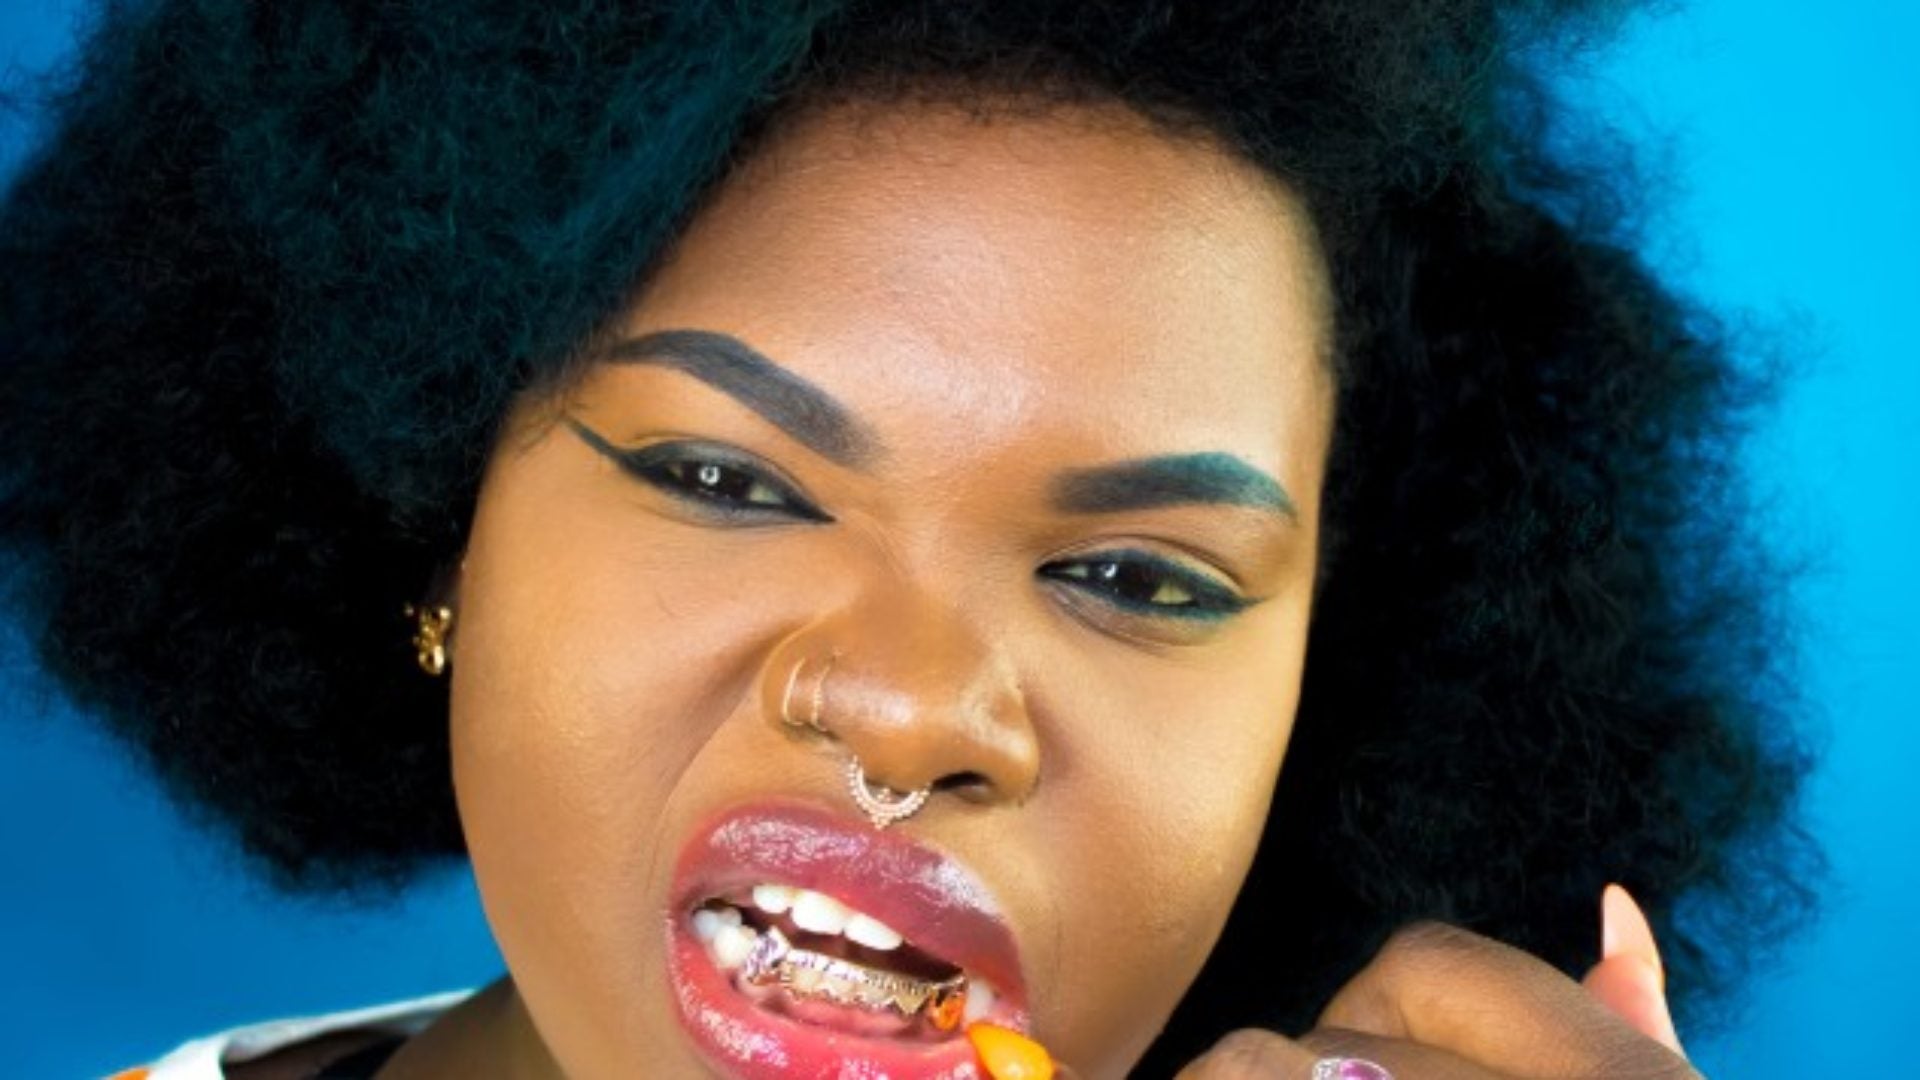 These 15 Beauties In Grillz Make Us Want To Get Some Tooth Bling